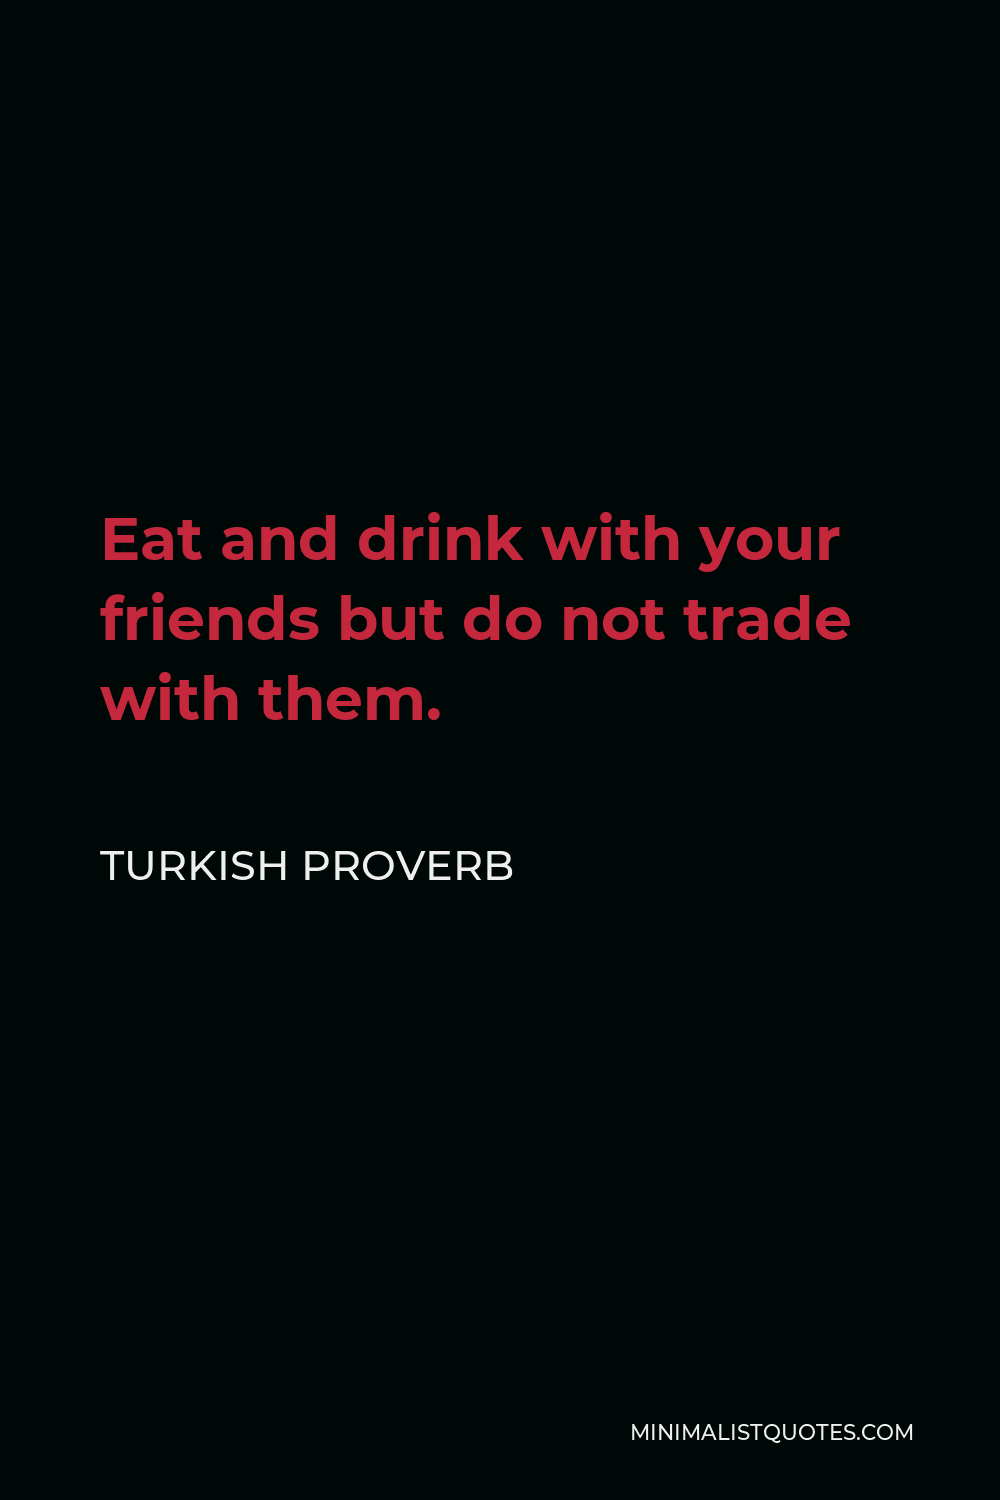 Turkish Proverb Quote - Eat and drink with your friends but do not trade with them.